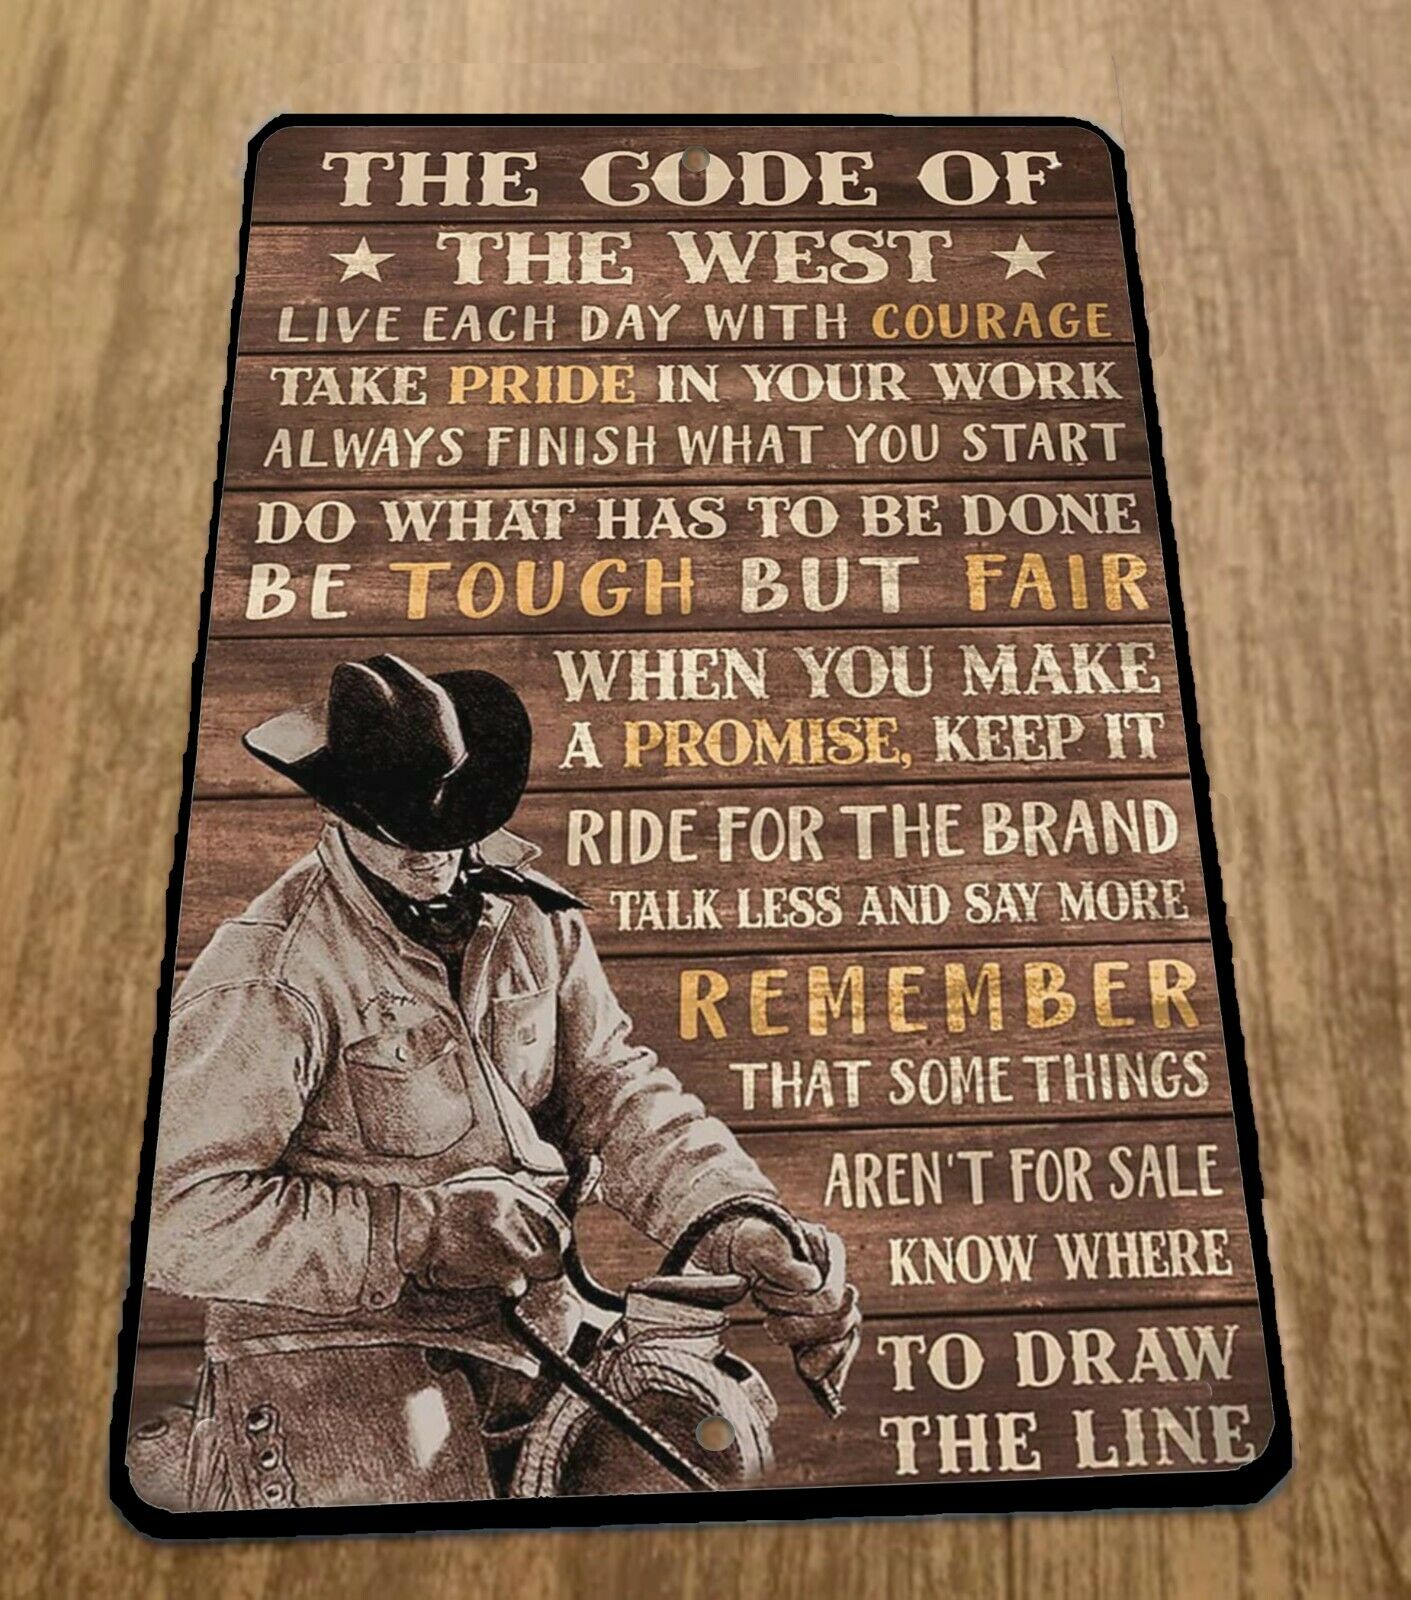 The Code of the West 8x12 Metal Wall Sign